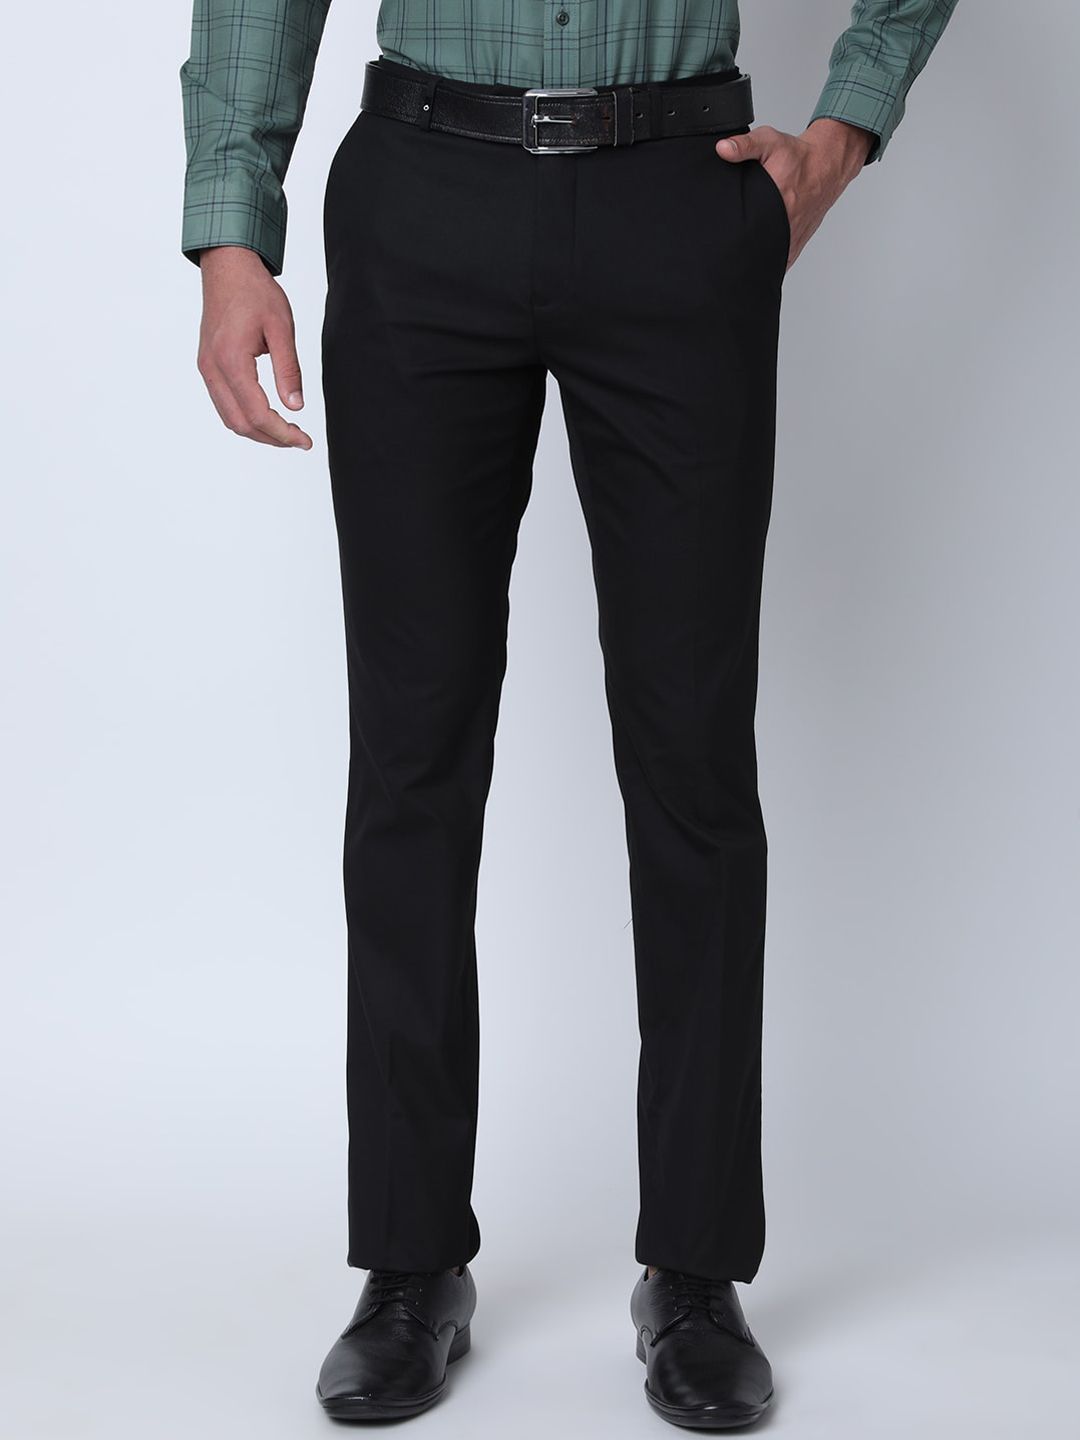 Oxemberg Formal Trousers  Buy Oxemberg Formal Trousers online in India